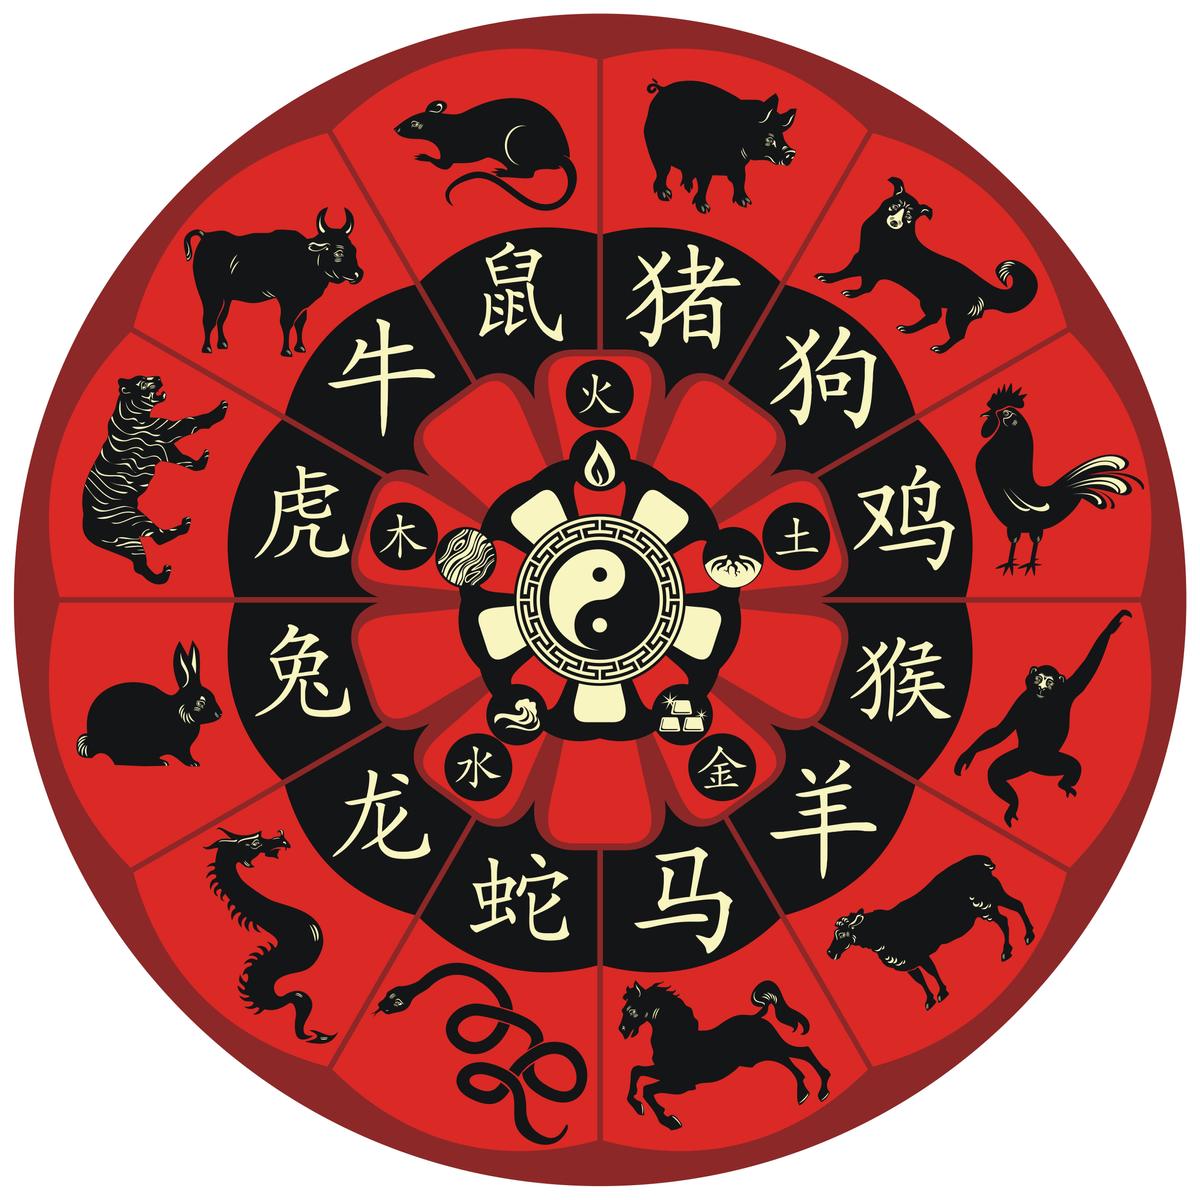 The Chinese zodiac wheel, including symbols of the five elements. (Yurumi/Shutterstock)